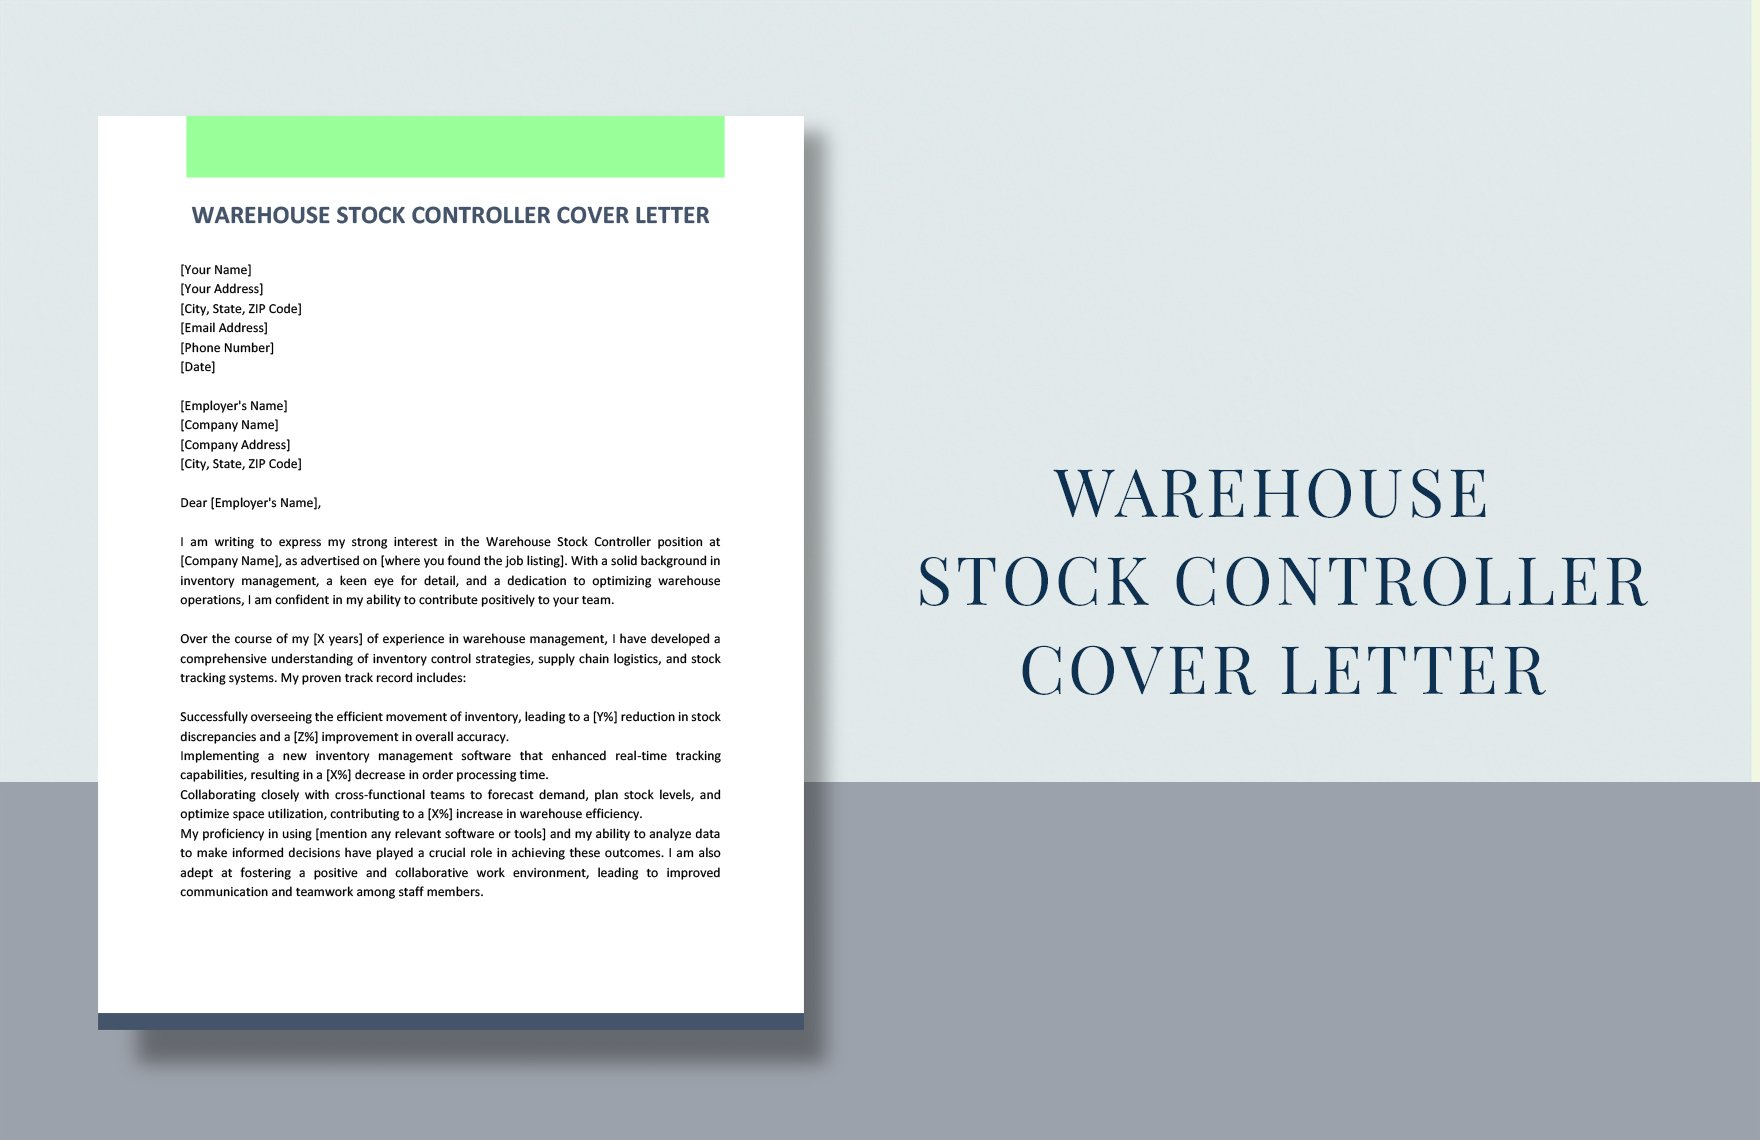 Warehouse Stock Controller Cover Letter in Word, Google Docs